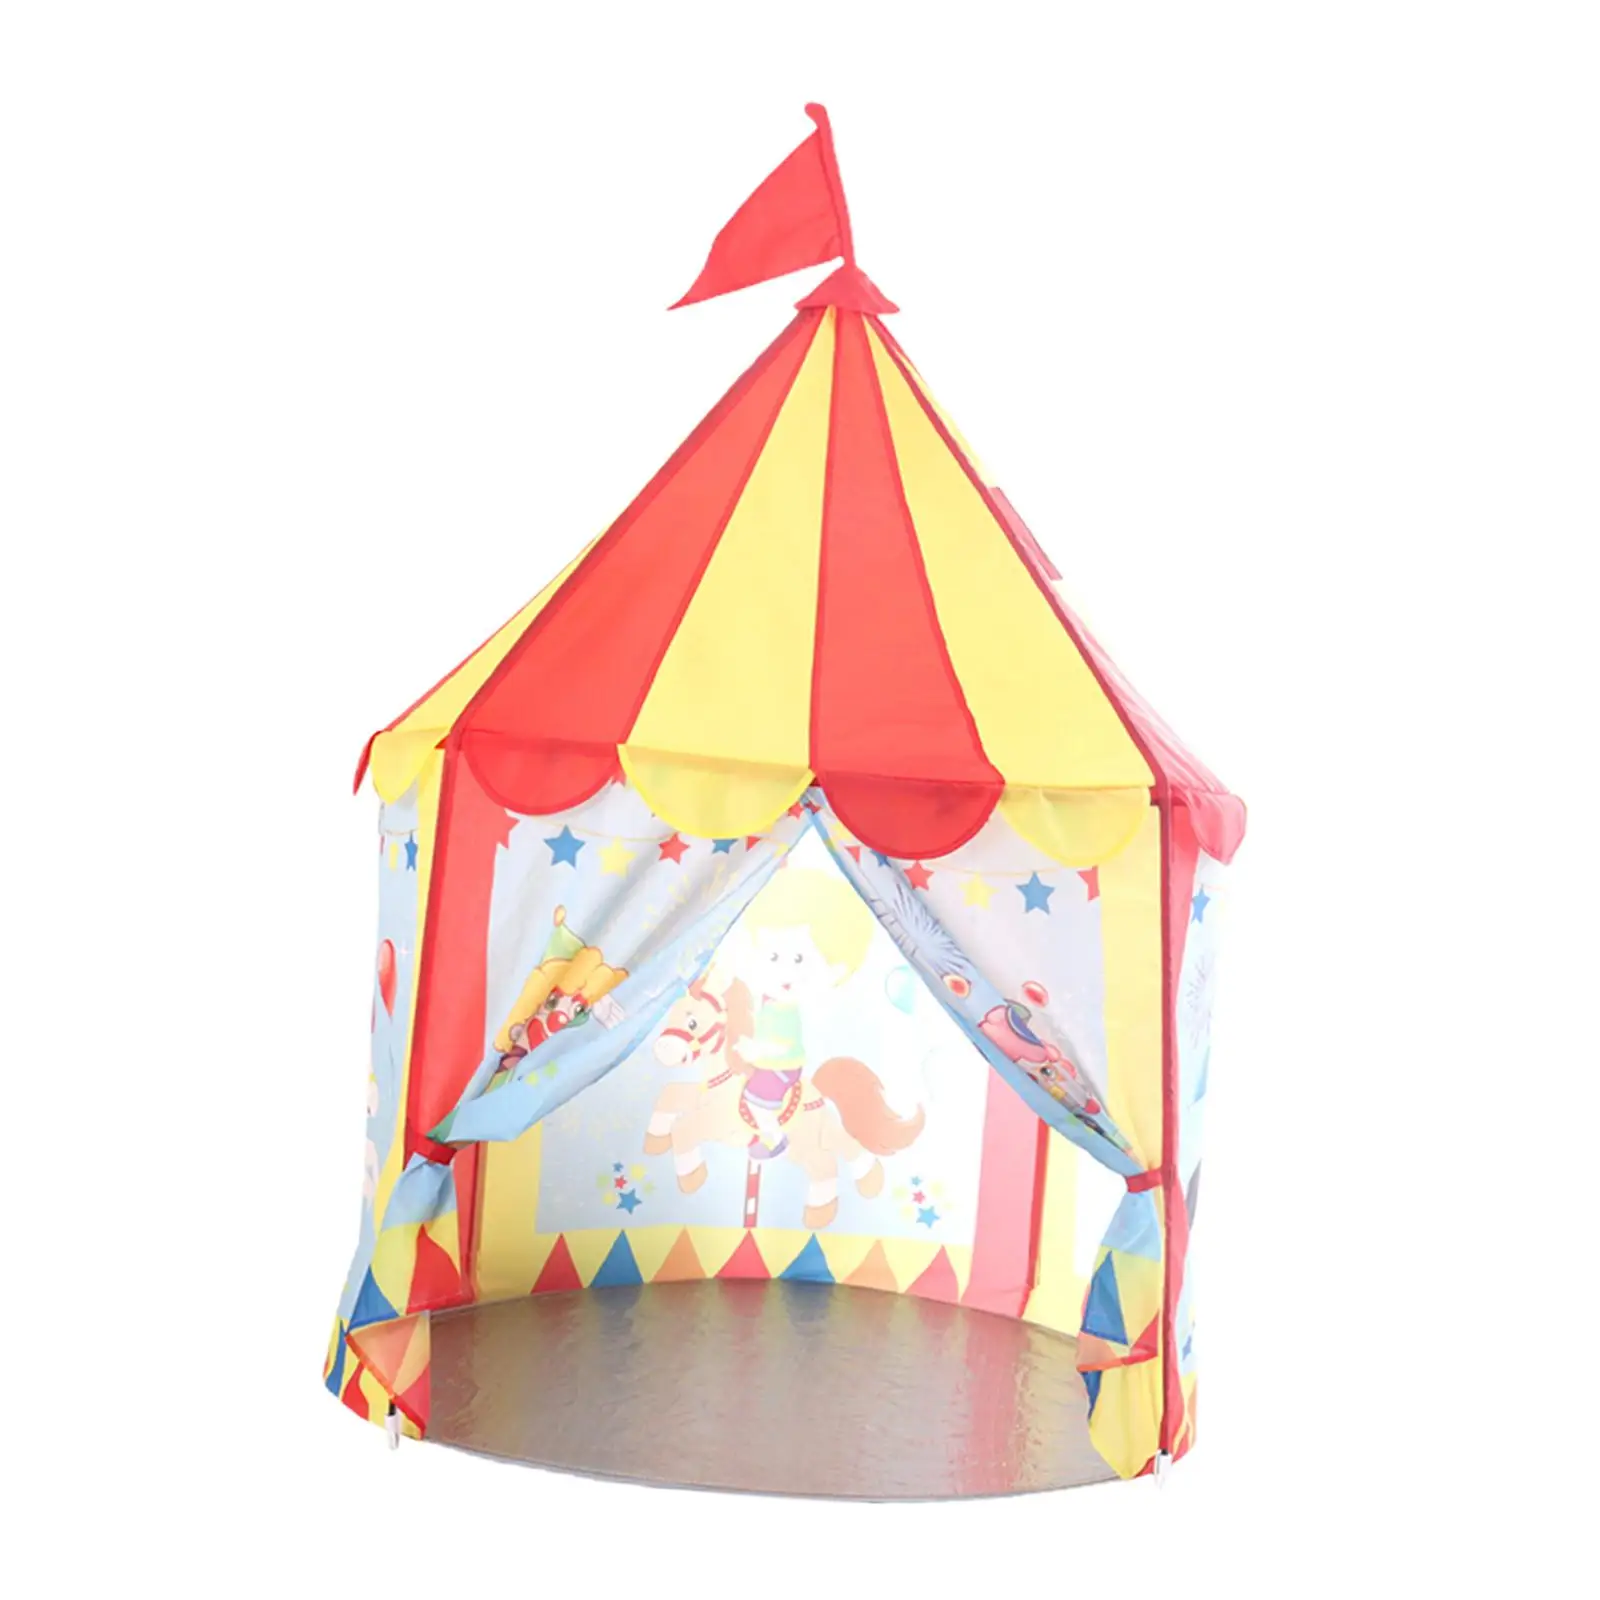 Play Tent for Kids Portable Indoor Outdoor Use Play Teepee Prince Castle Tent for garden Camping Yard Baby